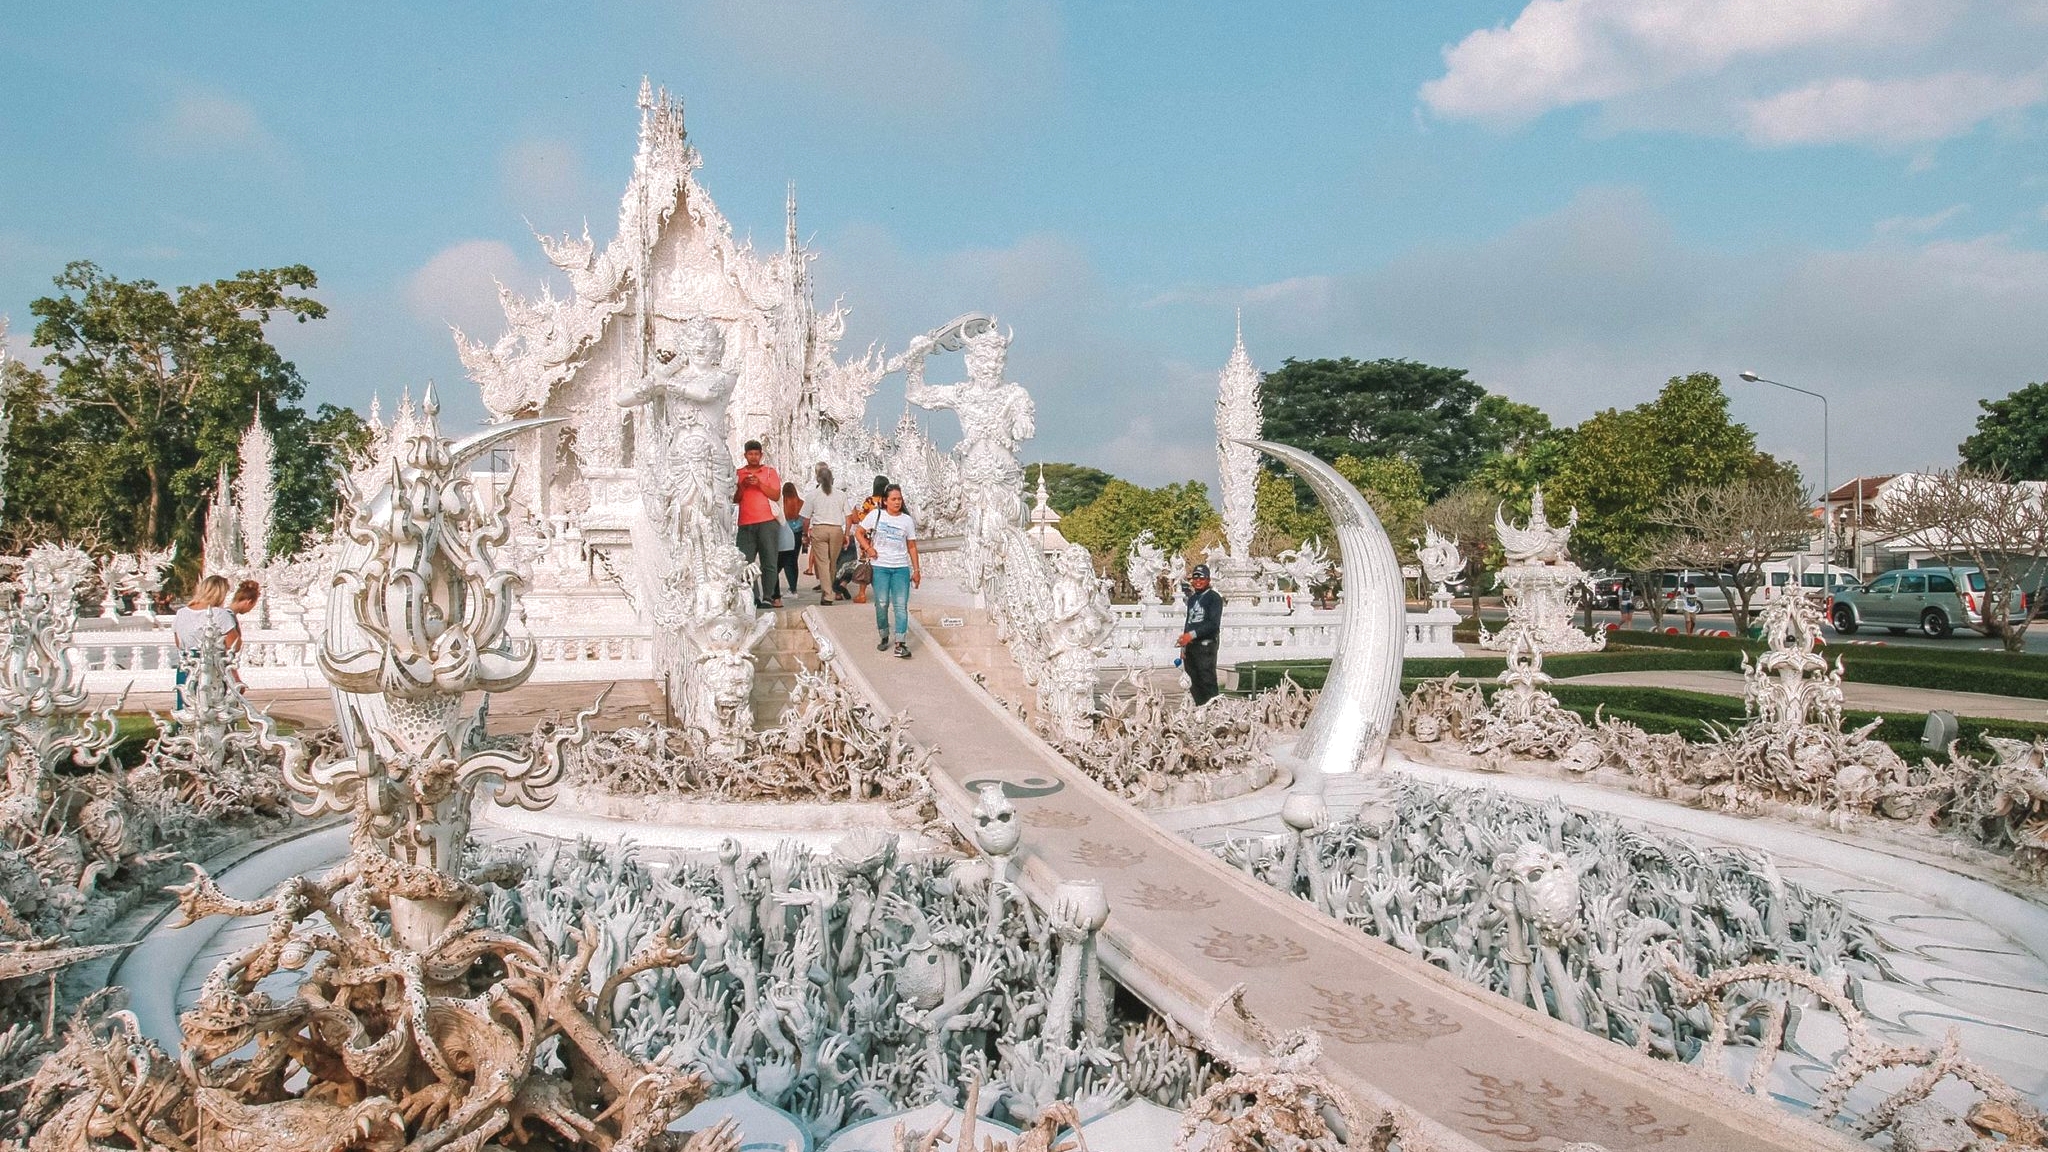 Day 12 Visit The White Temple With Its Recognizable, Elaborate Embellishments And Unique Style